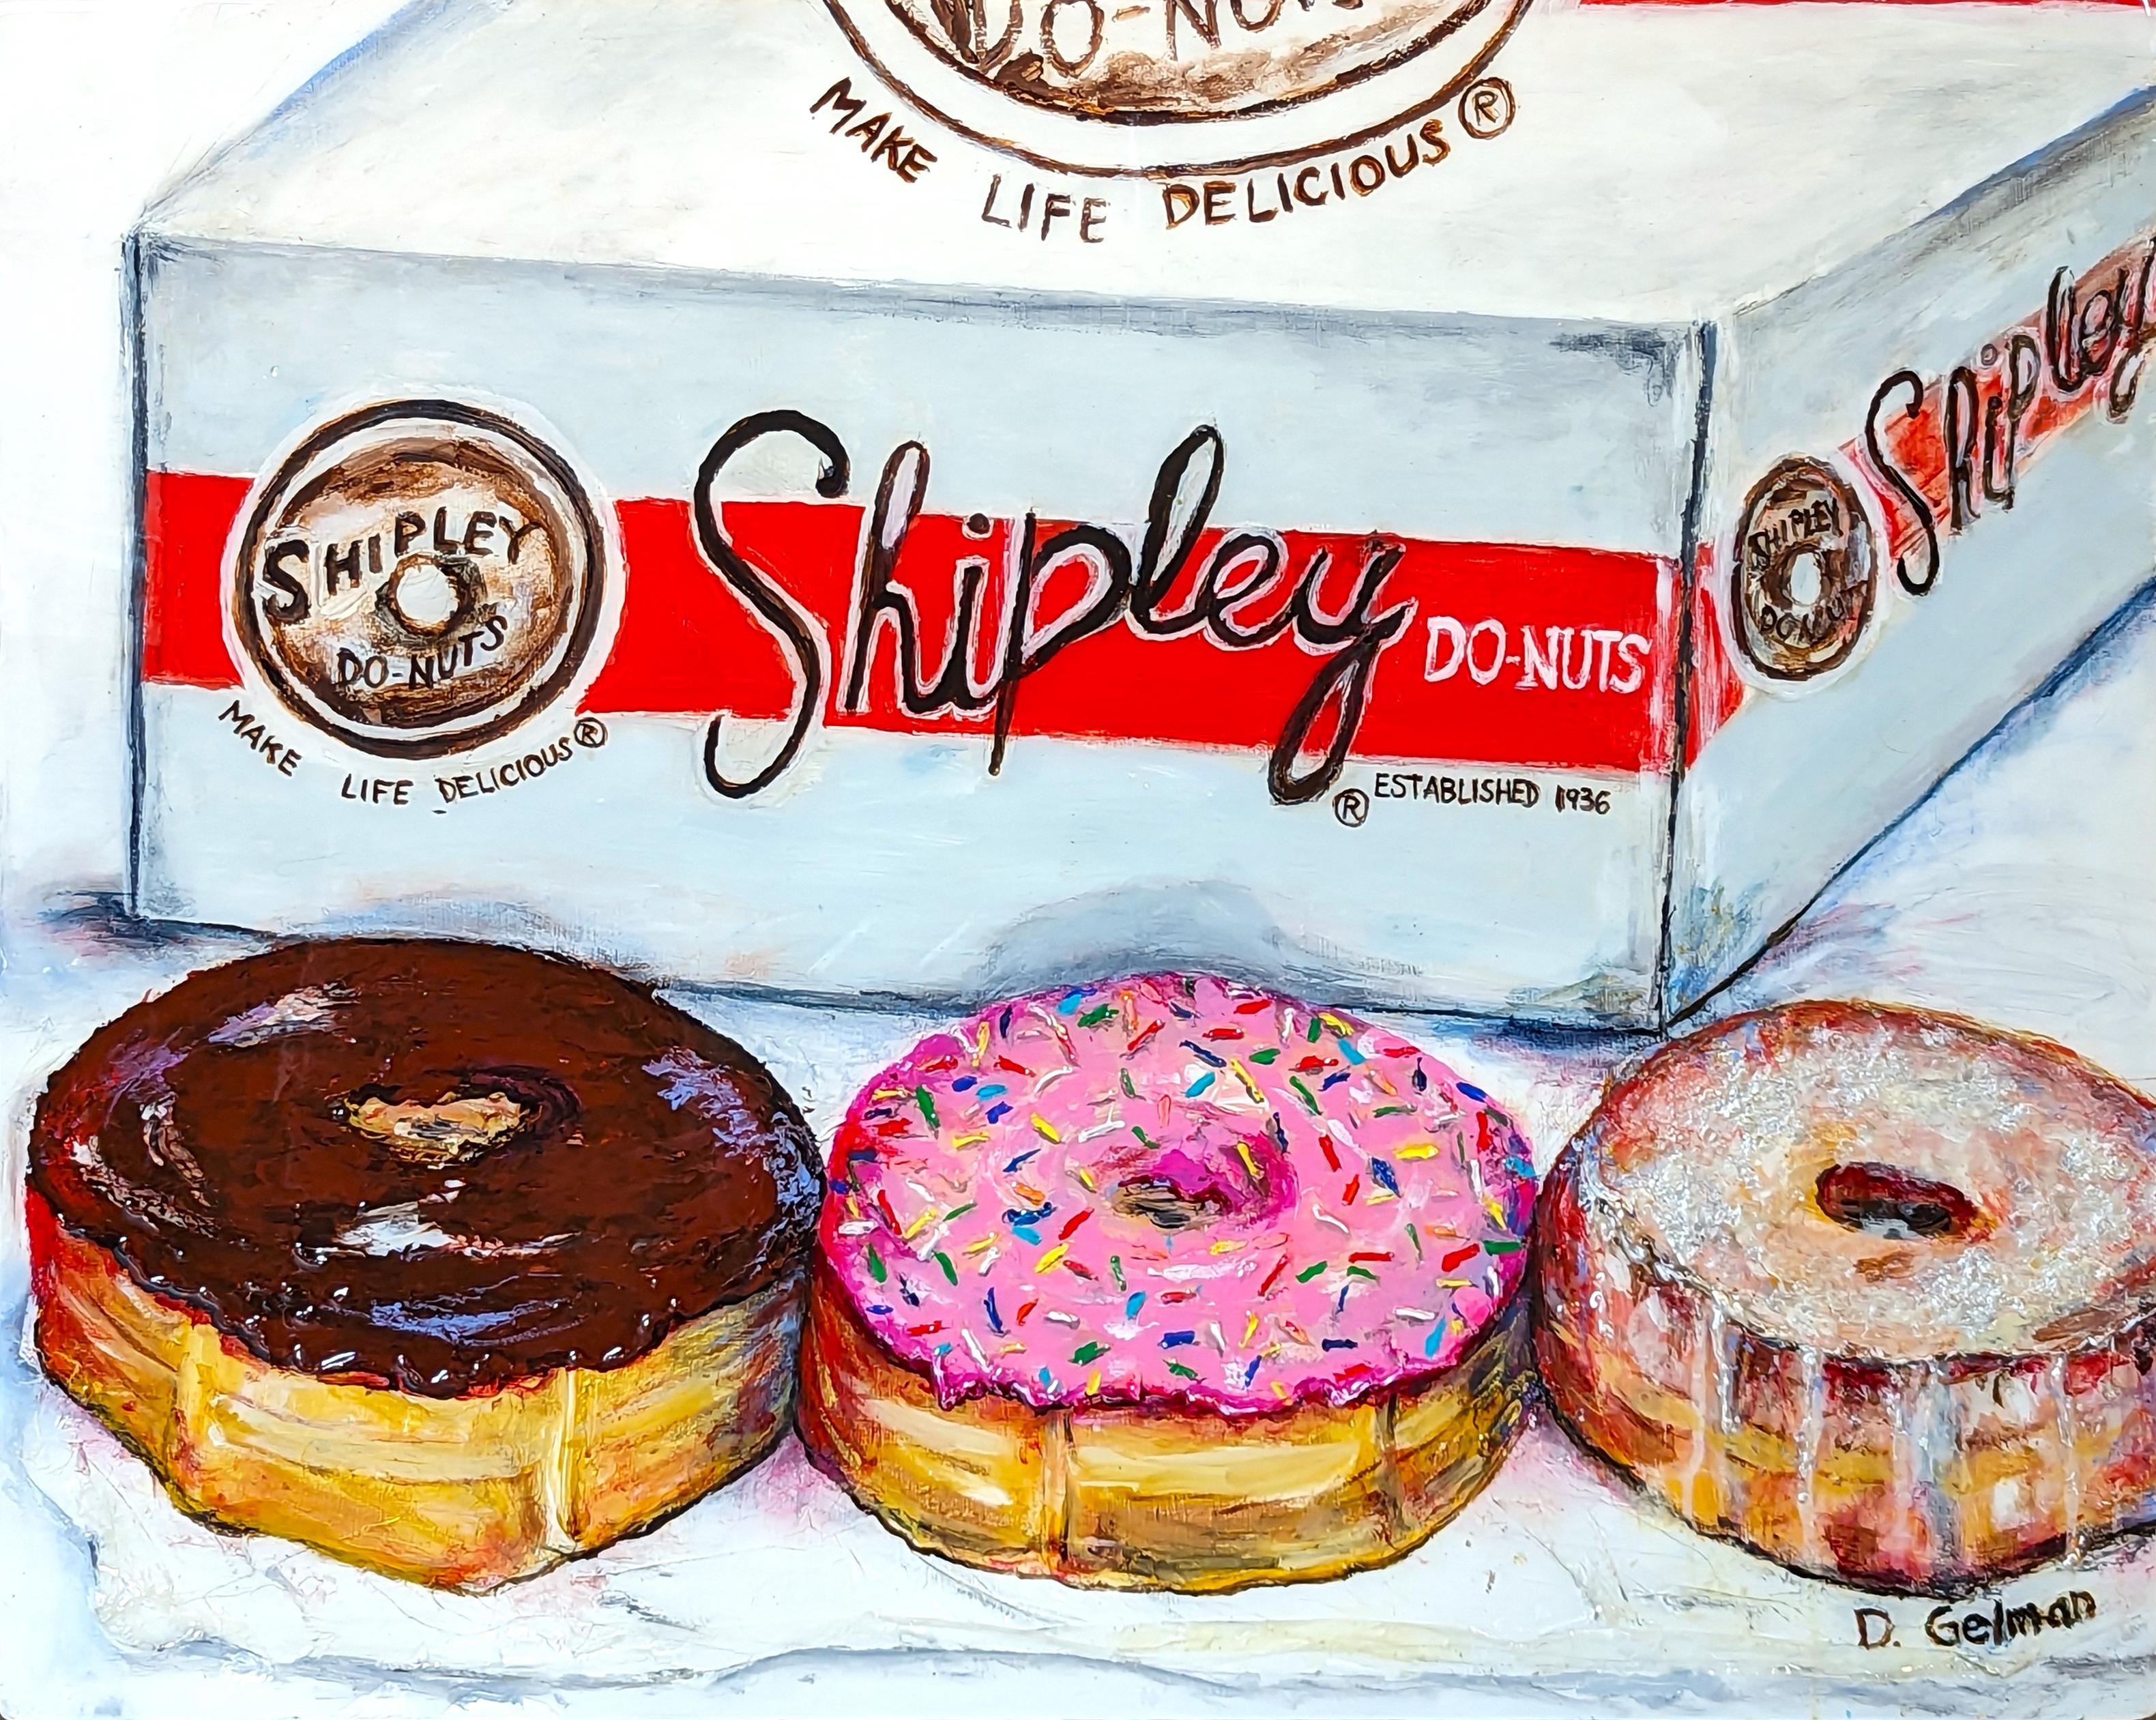 Diane Gelman Abstract Painting - “Shipley's Do-Nuts” Contemporary Colorful Mixed Media Food Collage